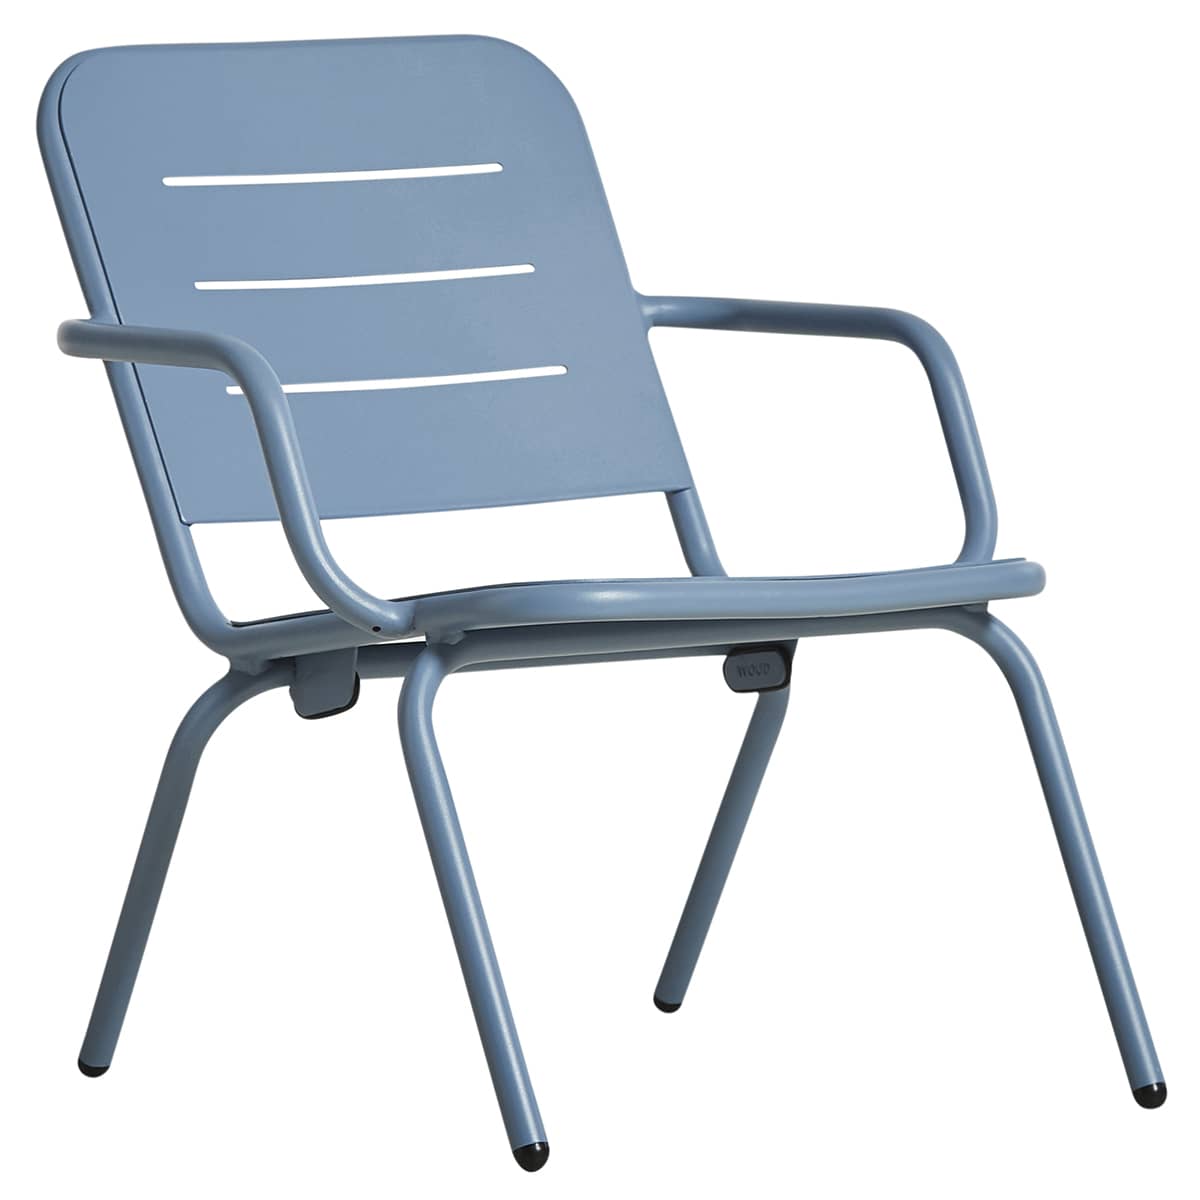 RAY outdoor lounge chair, by FASTING & ROLFF for WOUD